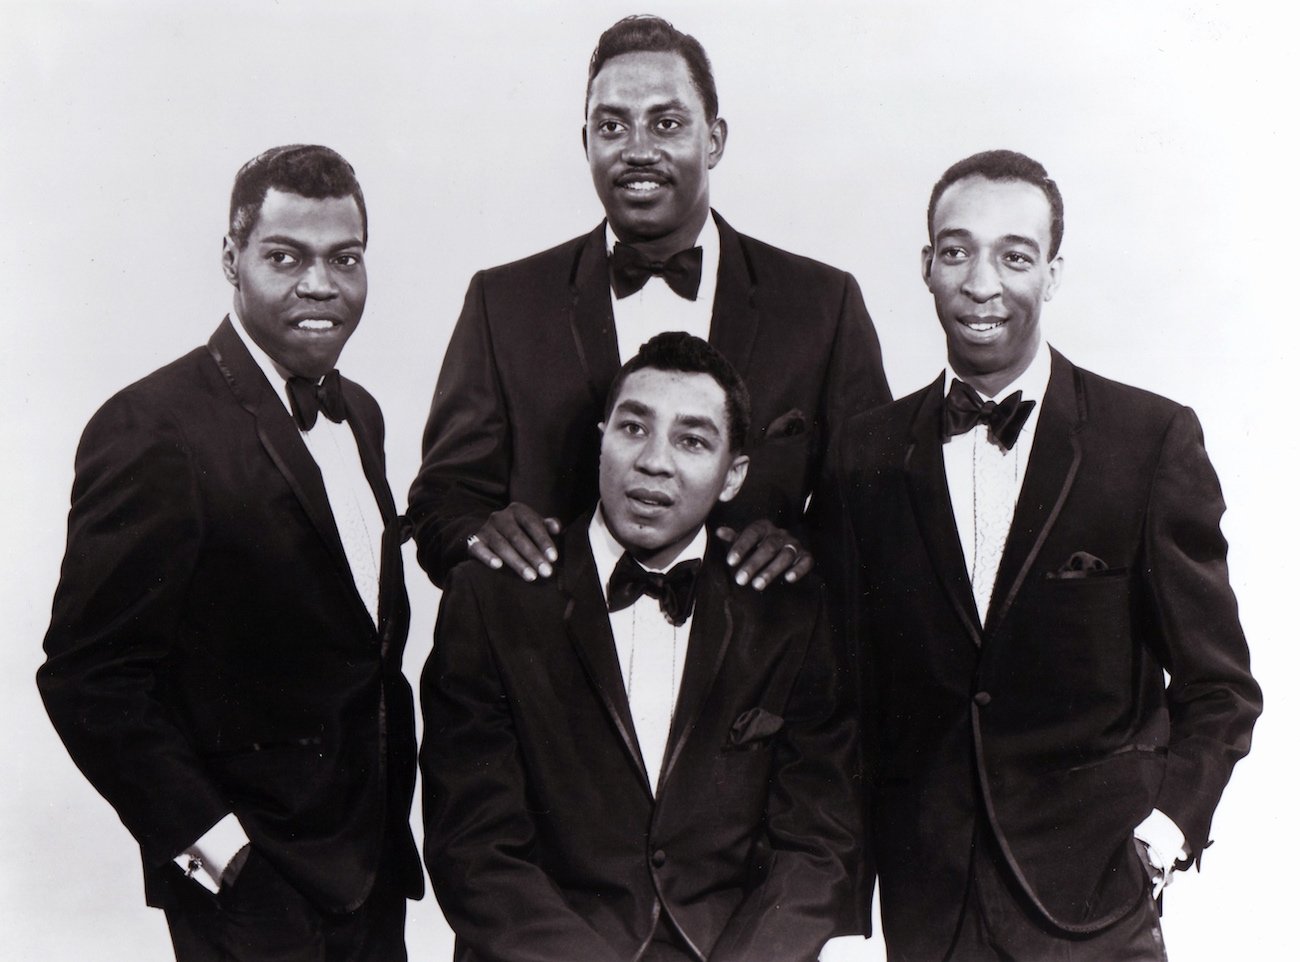 Smokey Robinson and the Miracles in suits. 